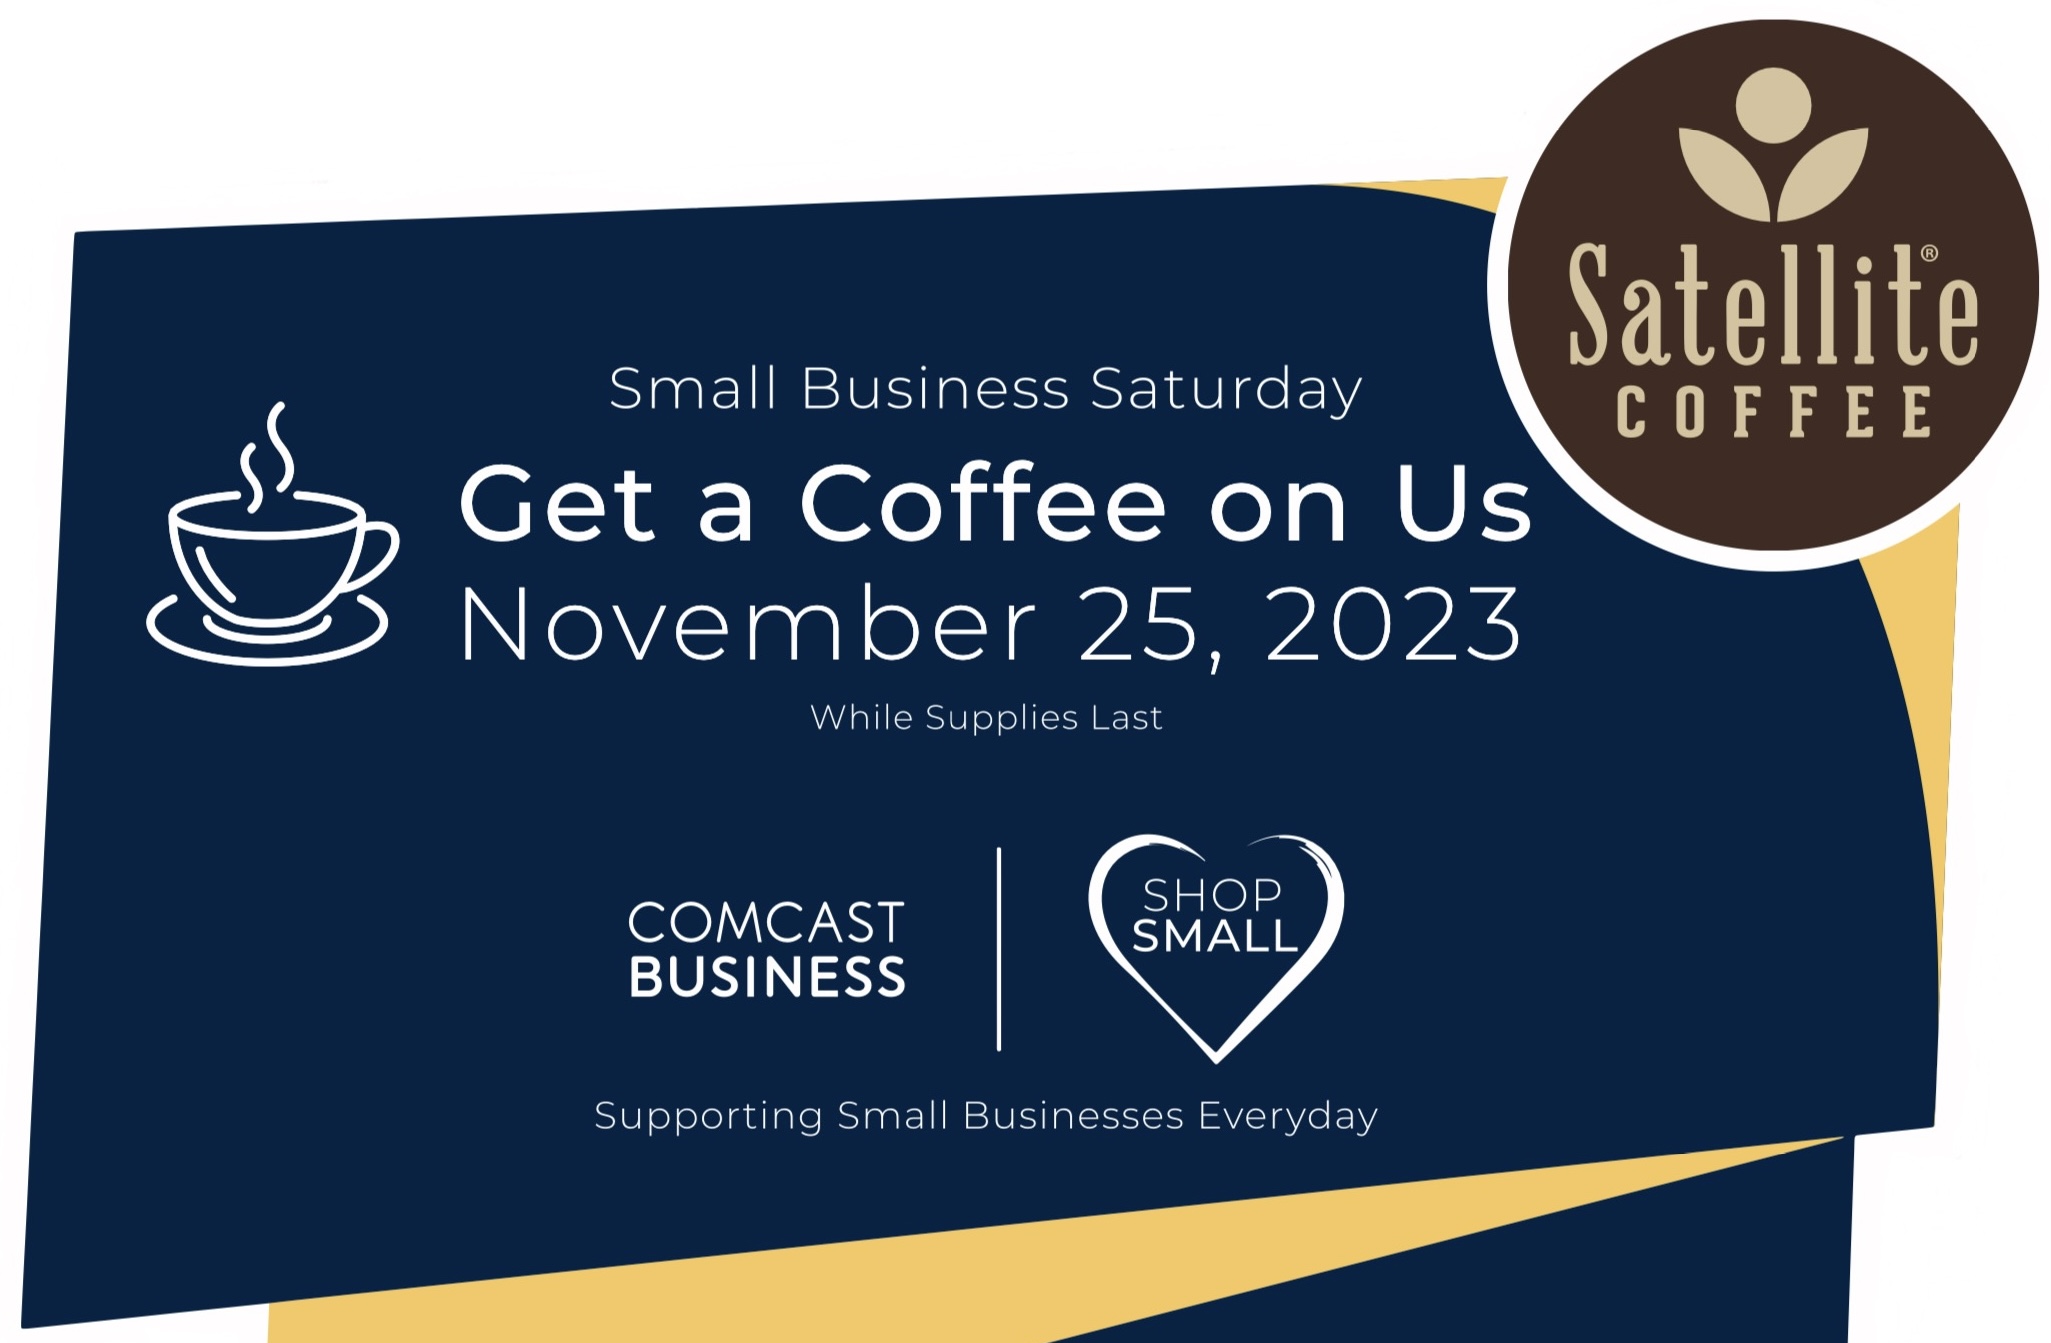 Comcast and Satellite Coffee Partner on Small Business Saturday Giveaway   